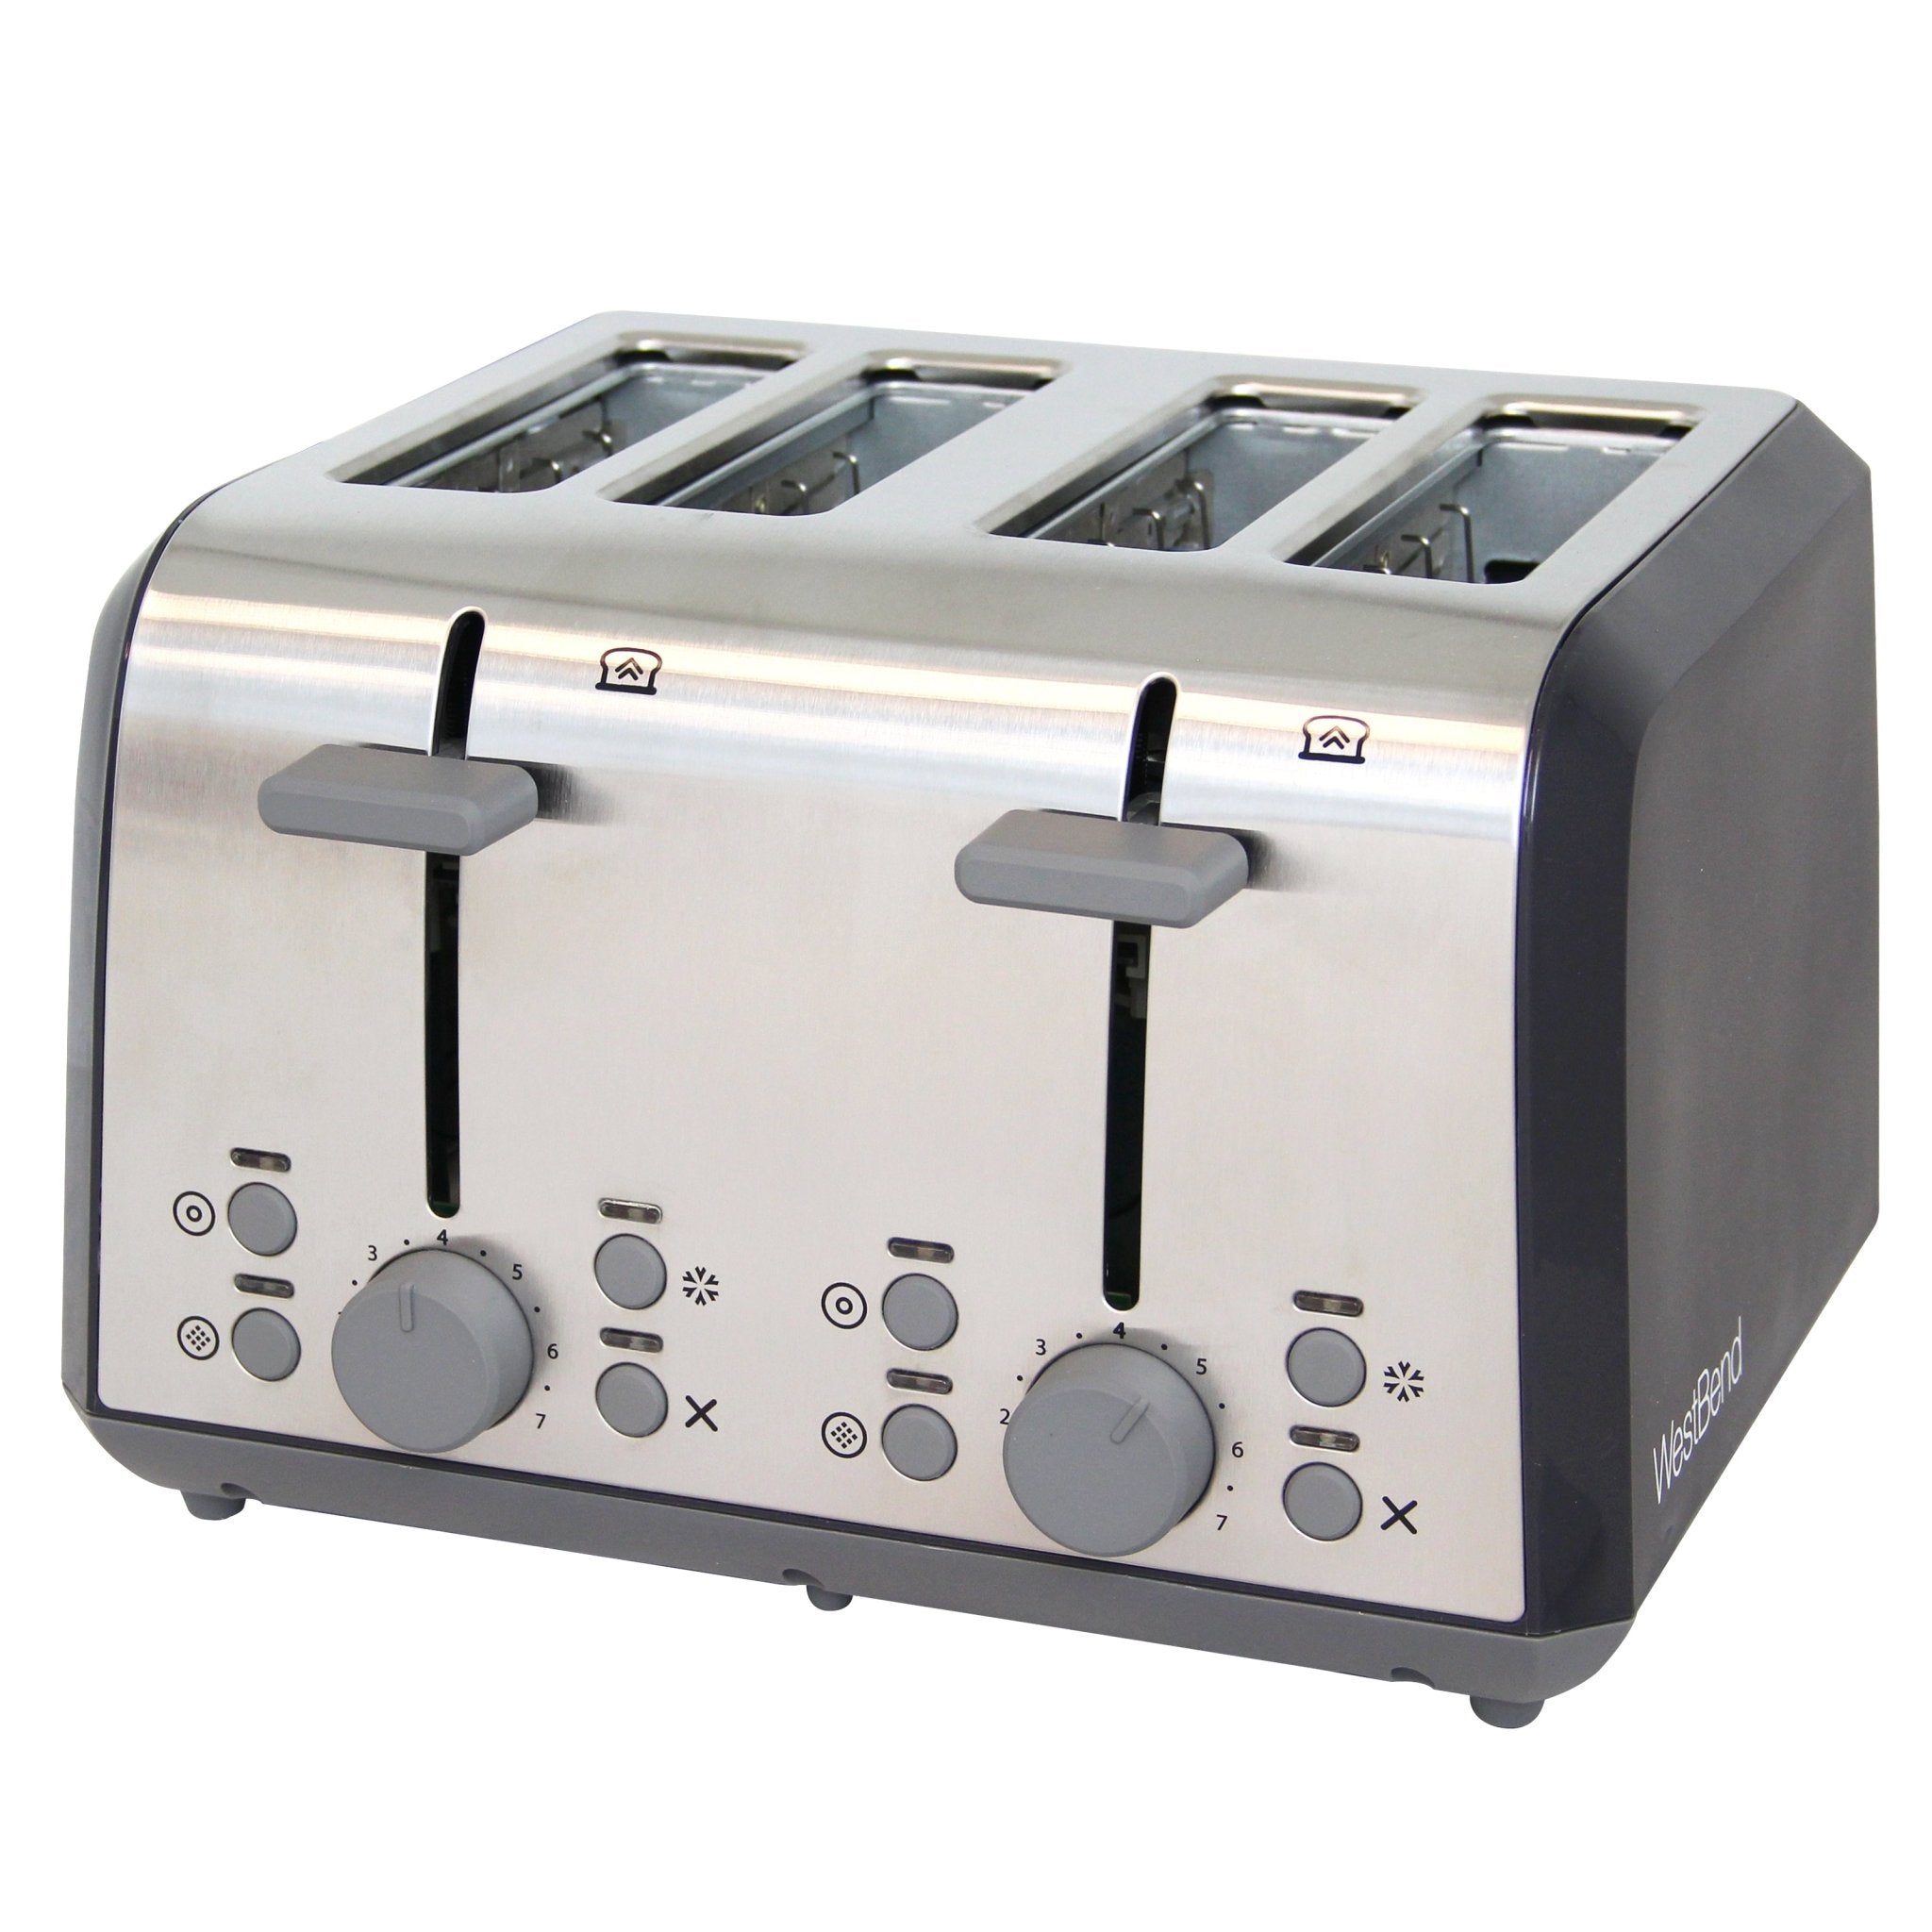 West Bend 4-Slice Toaster with Auto-Shut-Off